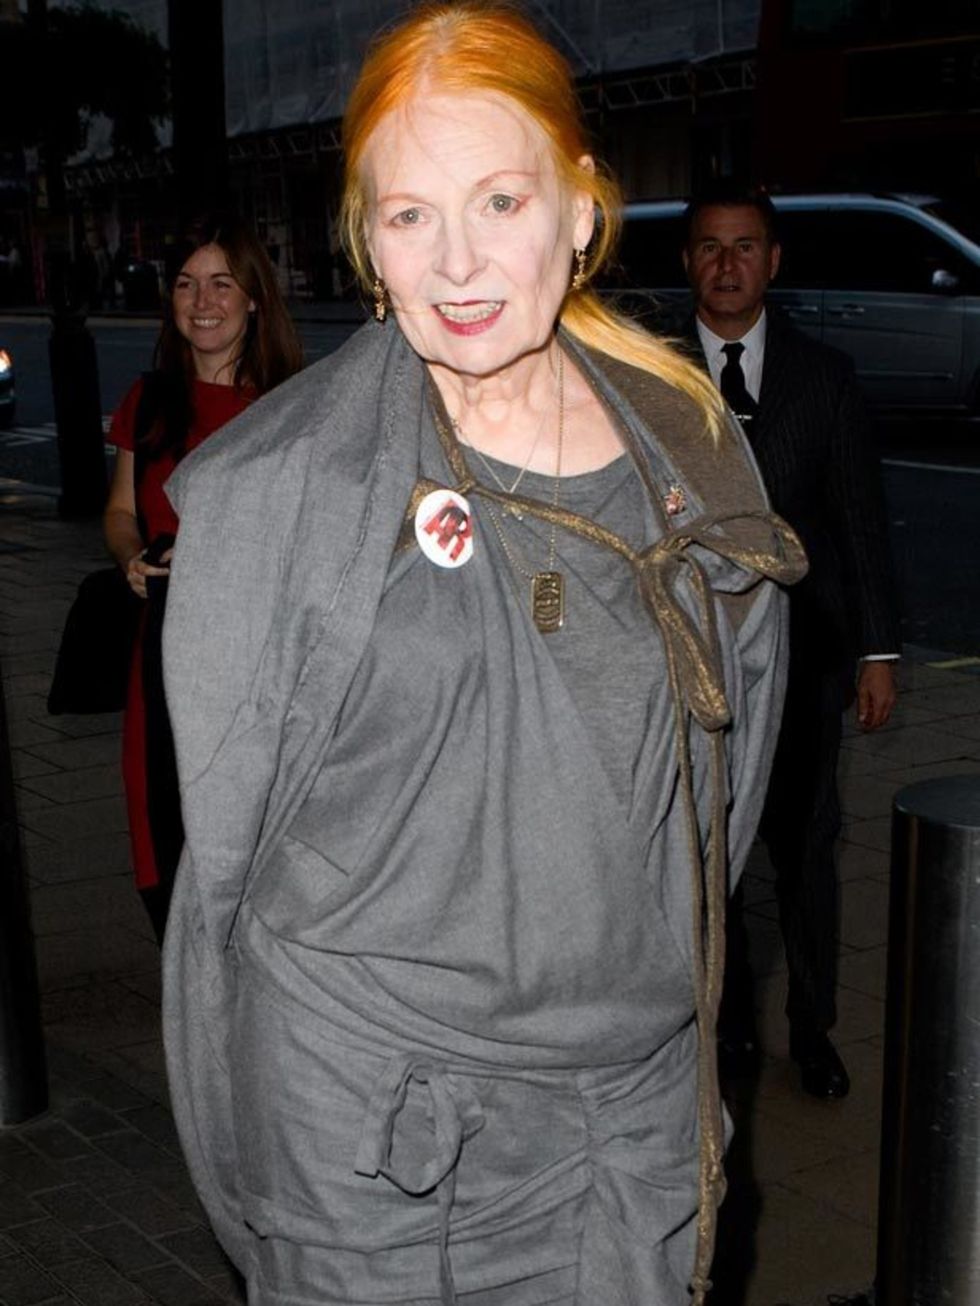 <p><a href="http://www.elleuk.com/catwalk/collections/vivienne-westwood/autumn-winter-2011">Vivienne Westwood</a> at the at the opening of the The Wool Modern exhibition at La Galleria, 7 September 2011</p>